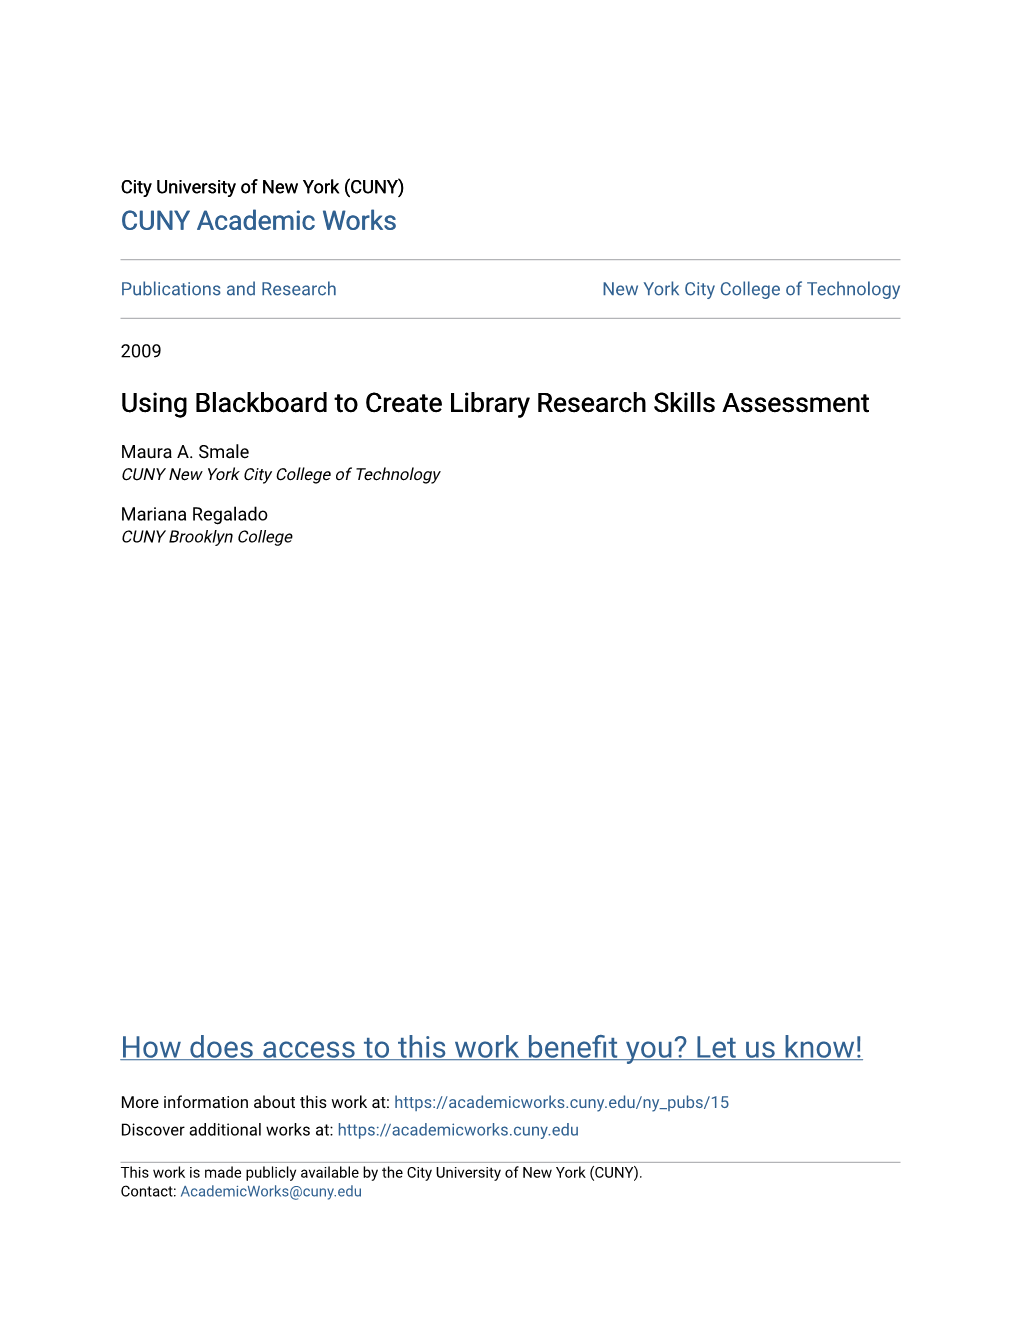 Using Blackboard to Create Library Research Skills Assessment